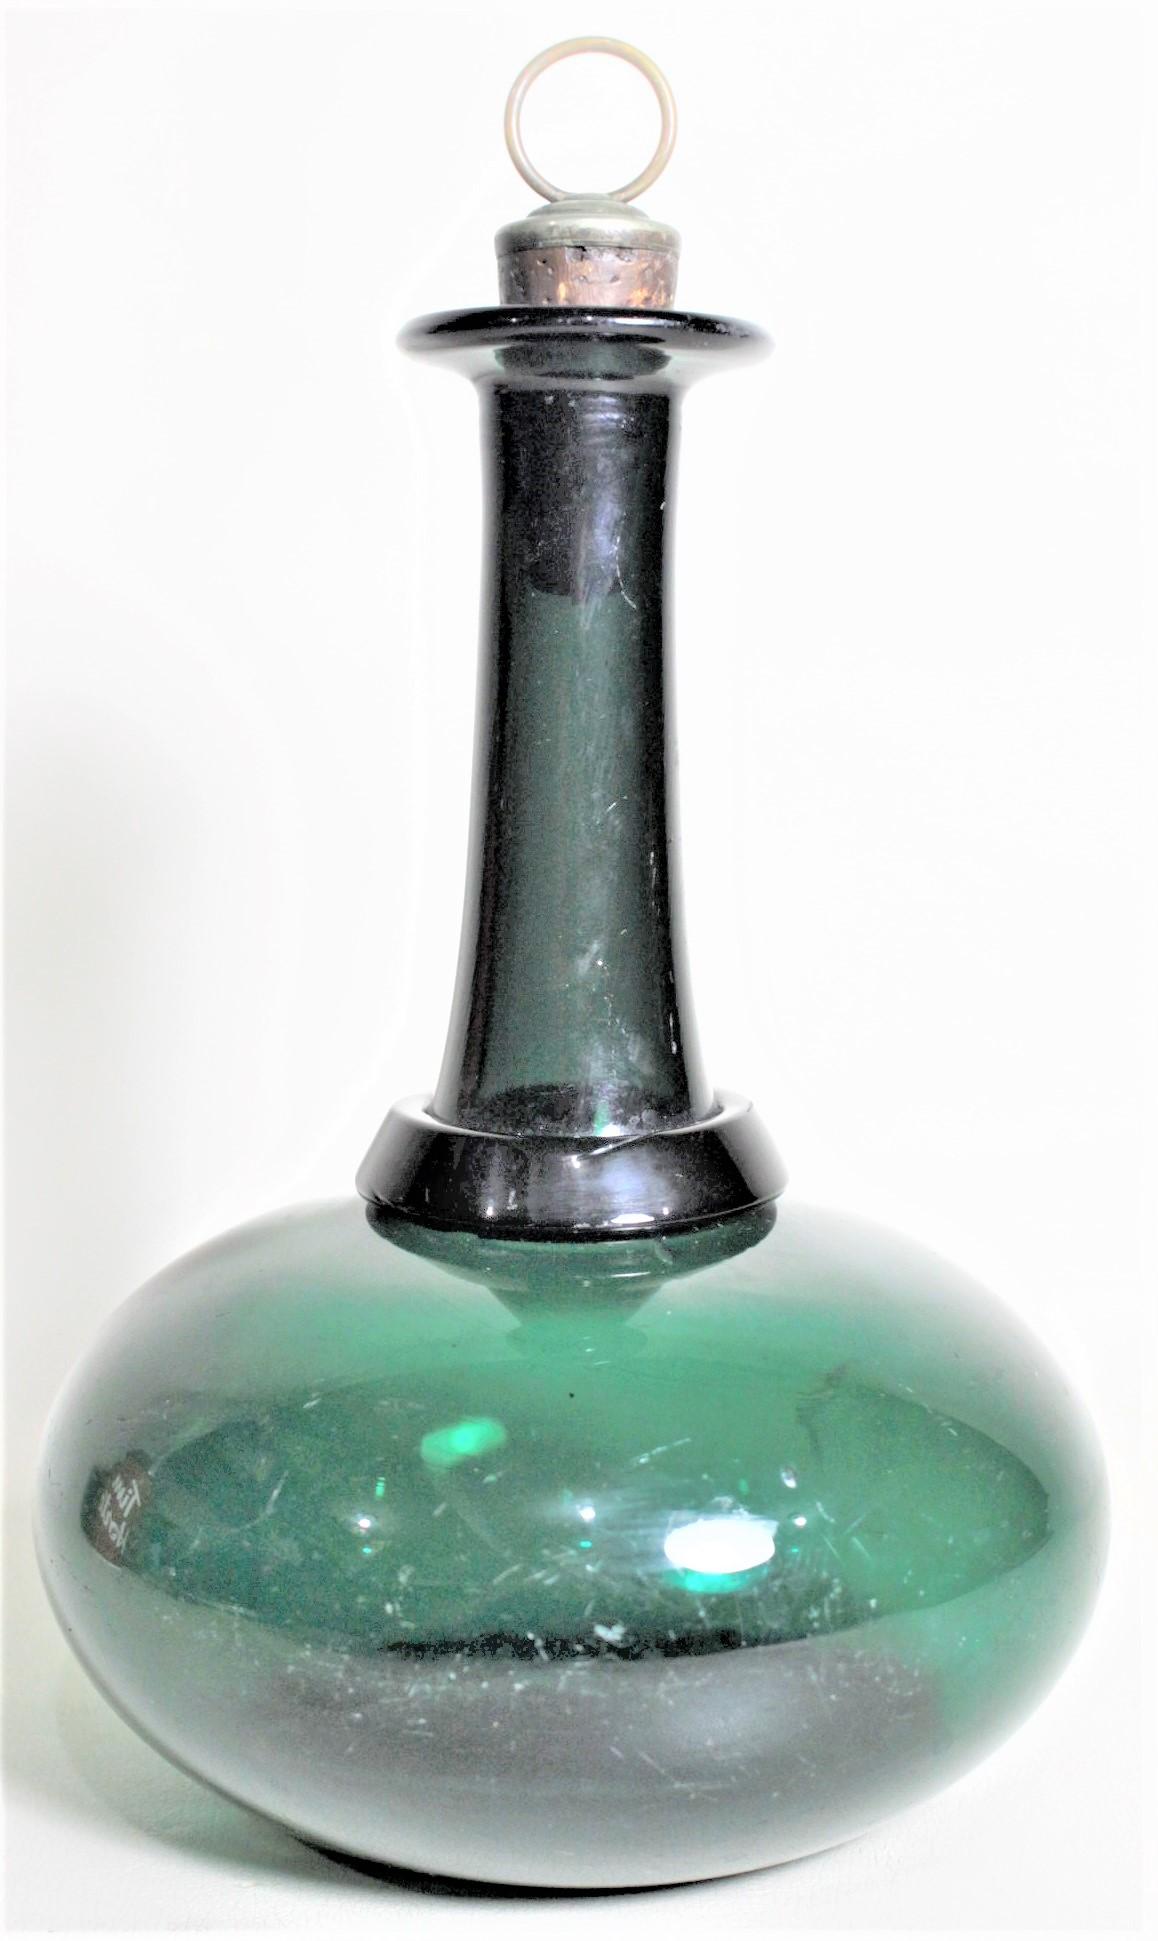 Antique Emerald Green English Bottle Decanter with Cork Stopper In Good Condition For Sale In Hamilton, Ontario